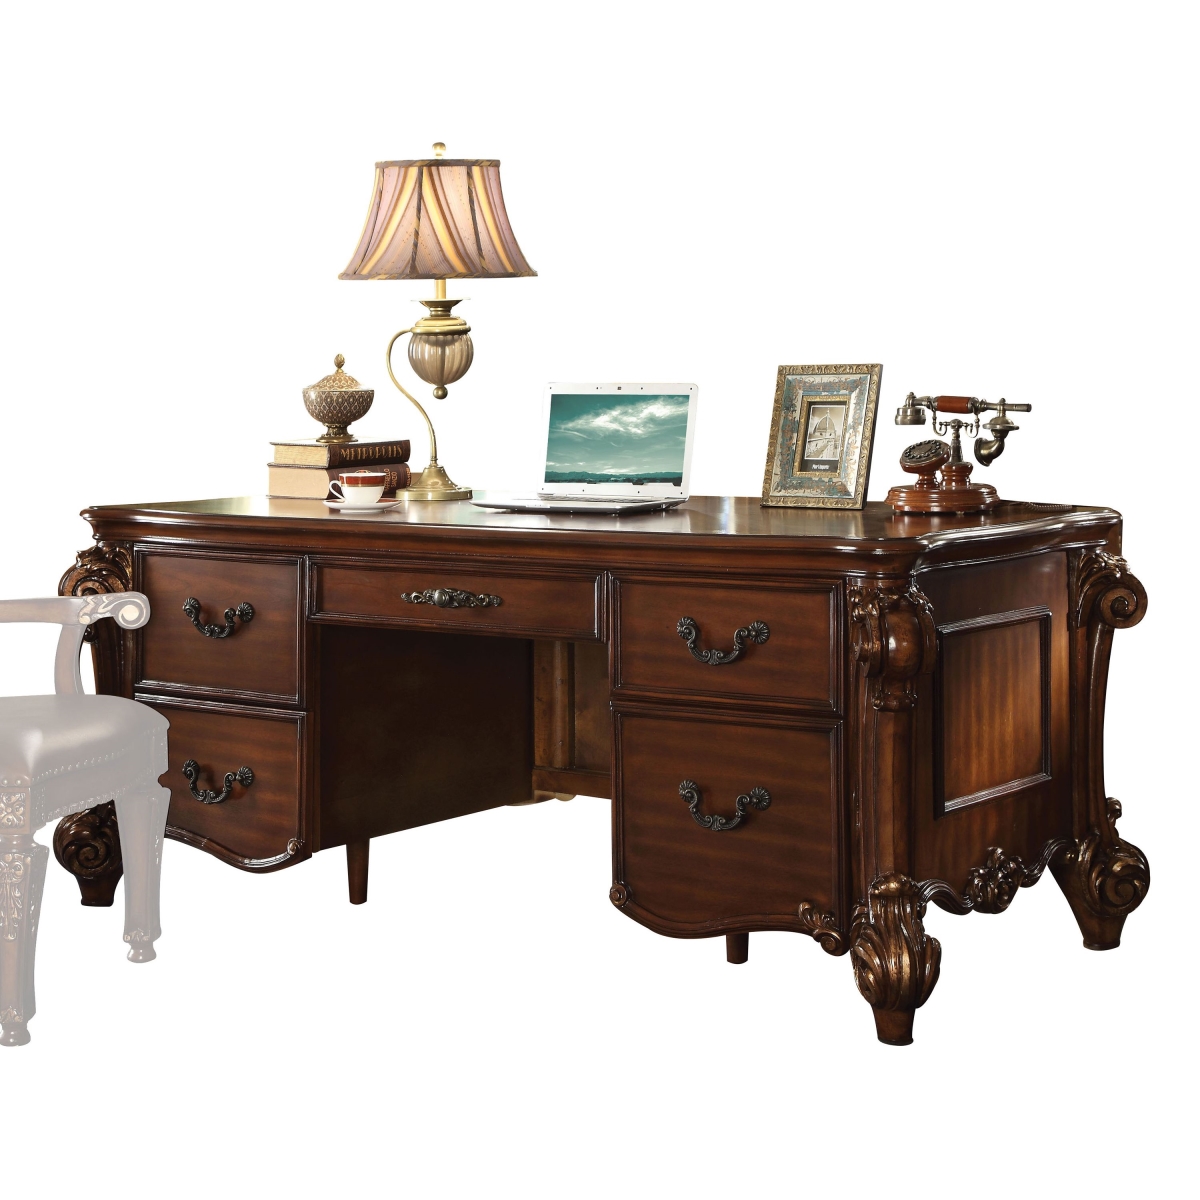 348663 37 X 74 X 31 In. Cherry Wood Poly Resin Executive Desk